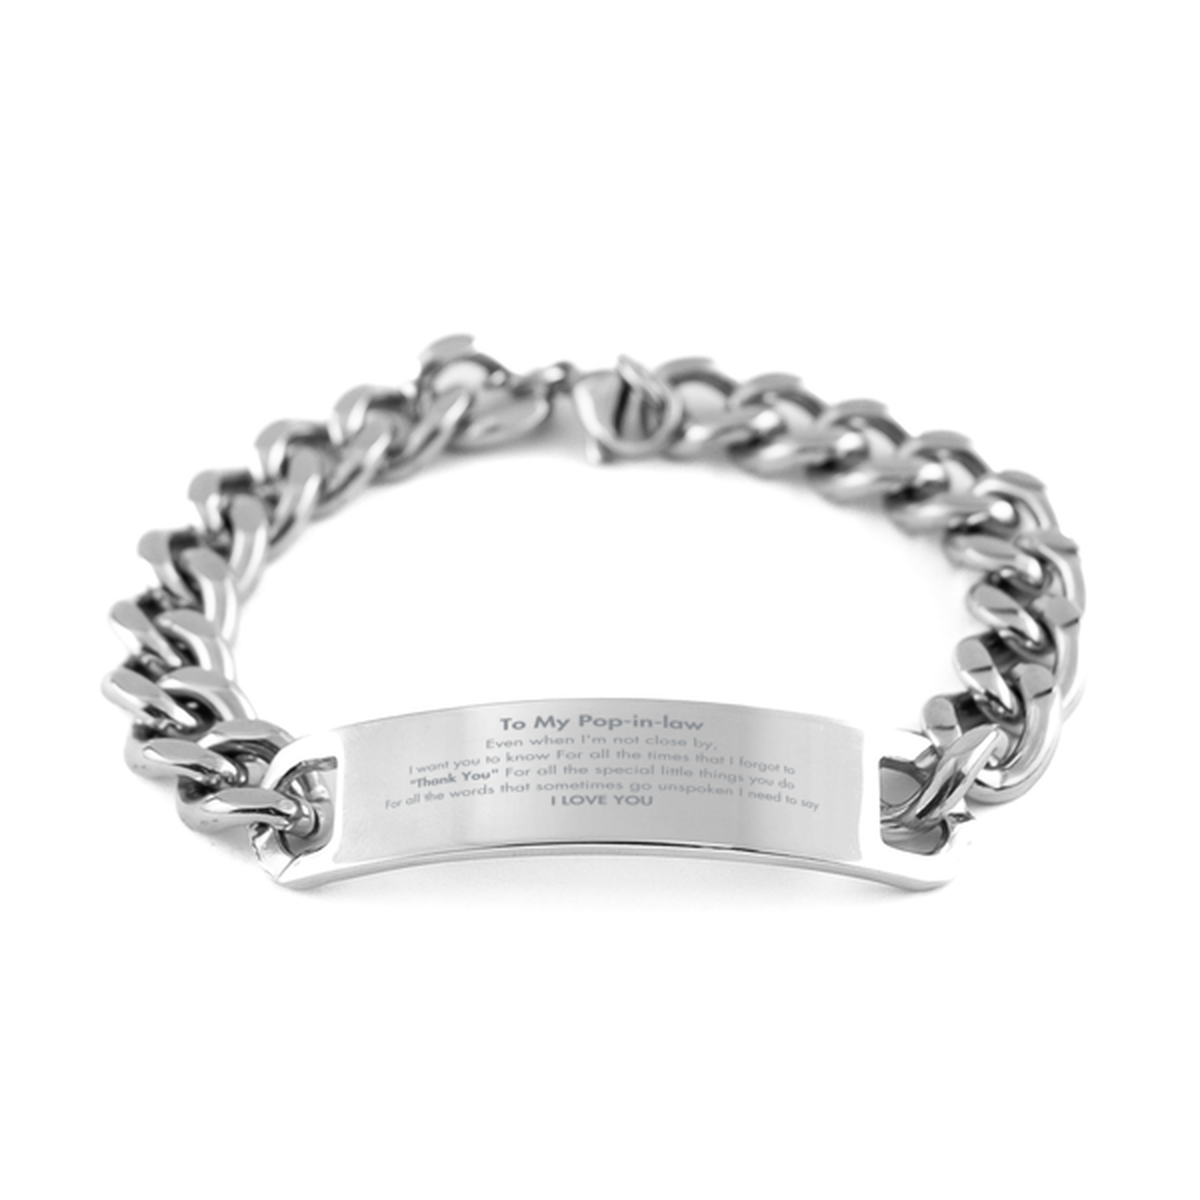 Thank You Gifts for Pop-in-law, Keepsake Cuban Chain Stainless Steel Bracelet Gifts for Pop-in-law Birthday Mother's day Father's Day Pop-in-law For all the words That sometimes go unspoken I need to say I LOVE YOU